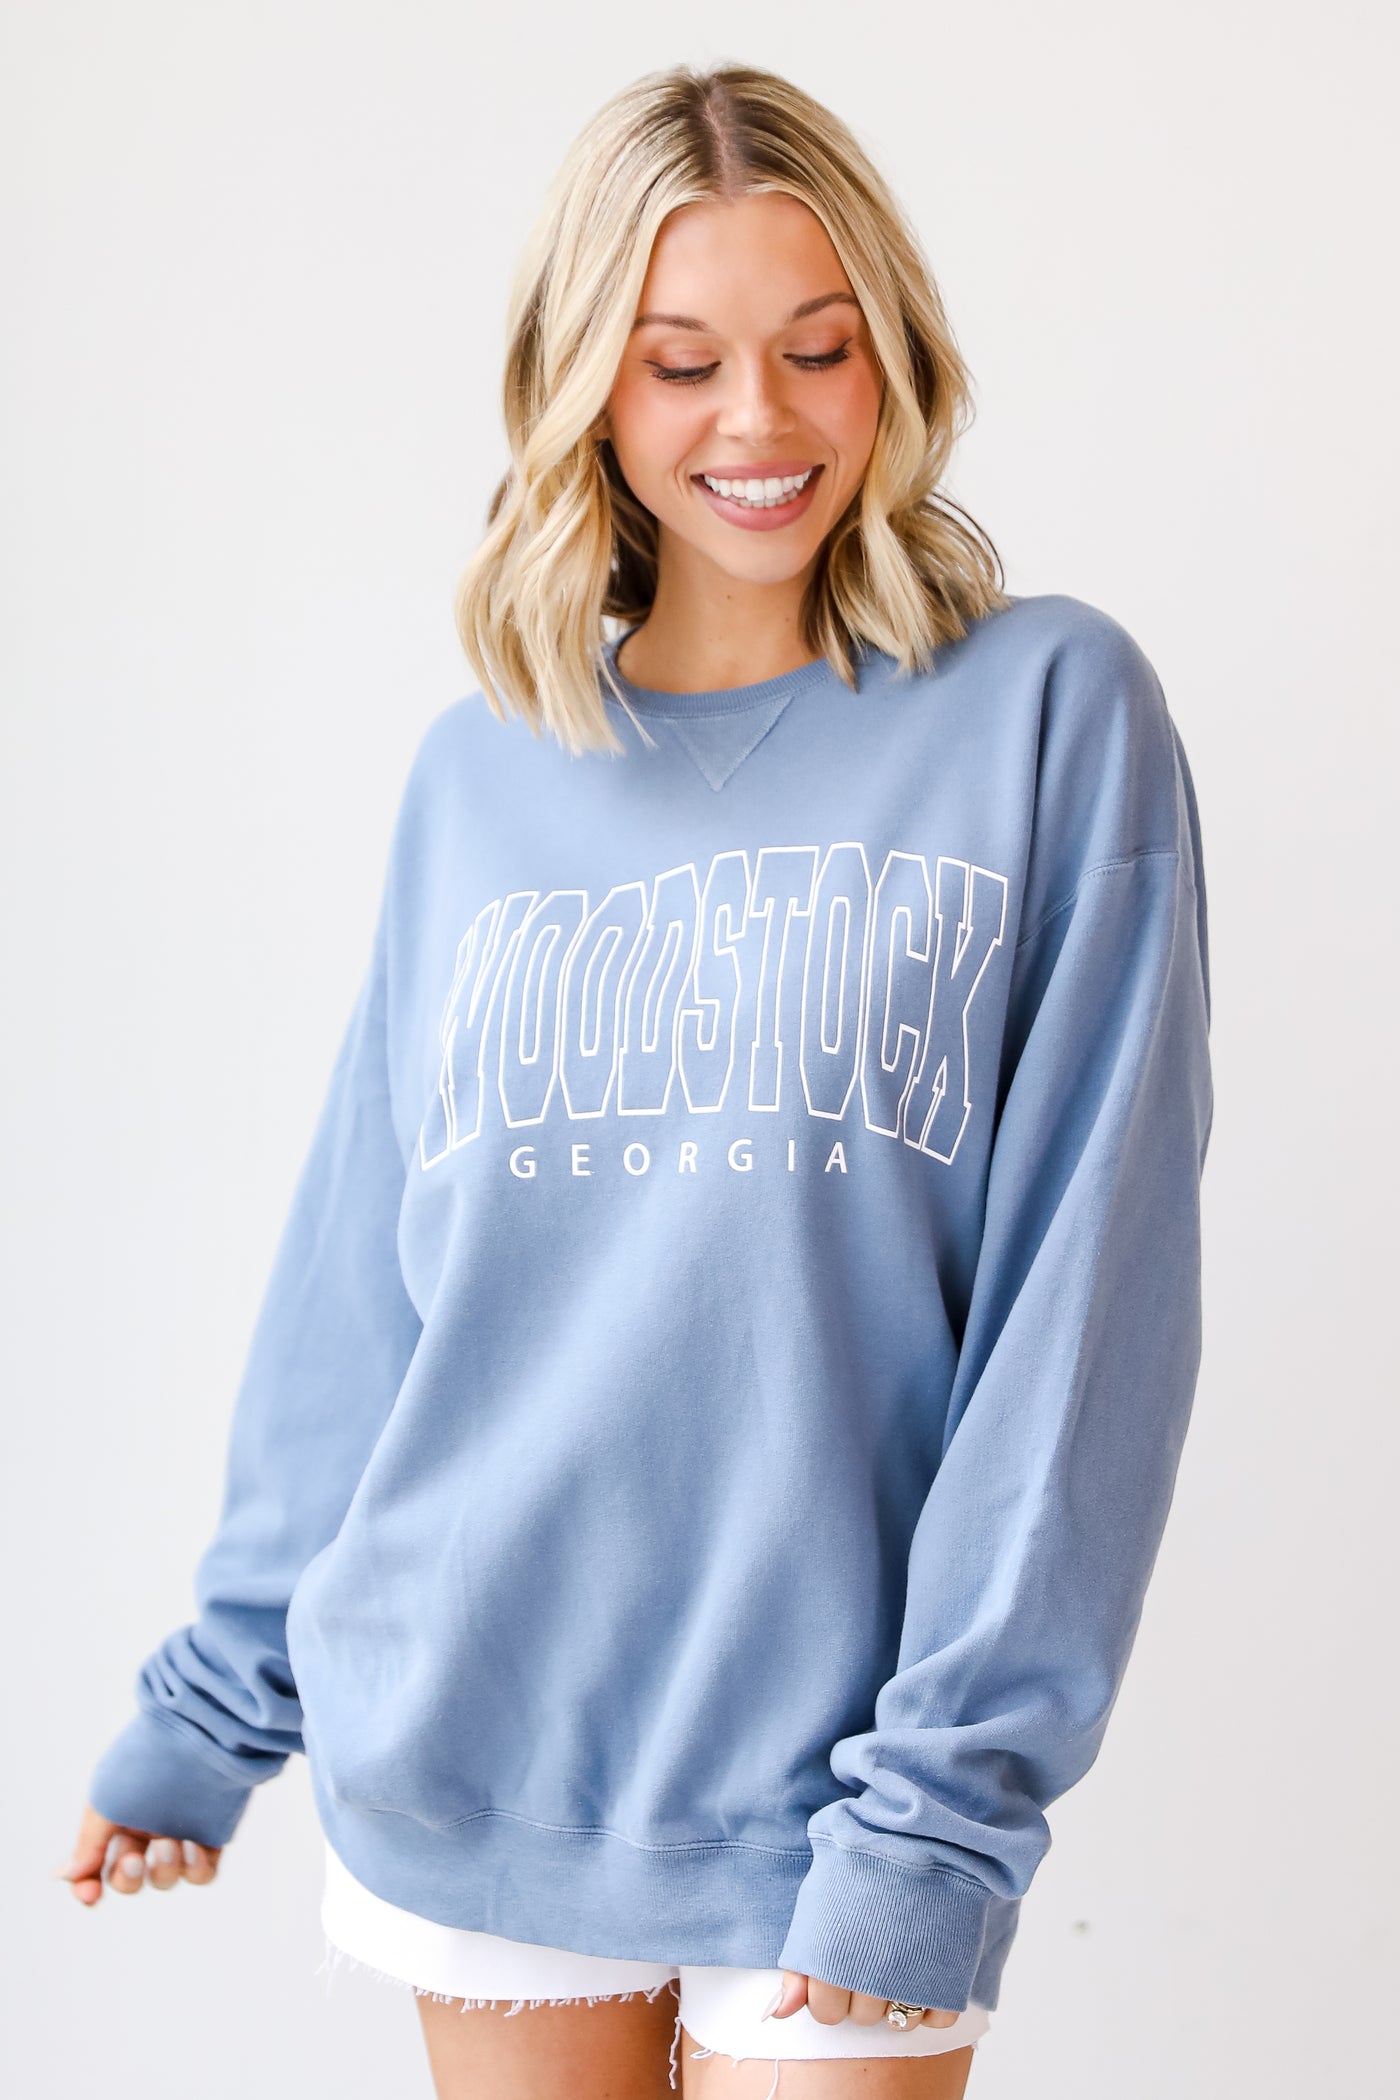 Blue Woodstock Georgia Pullover front view